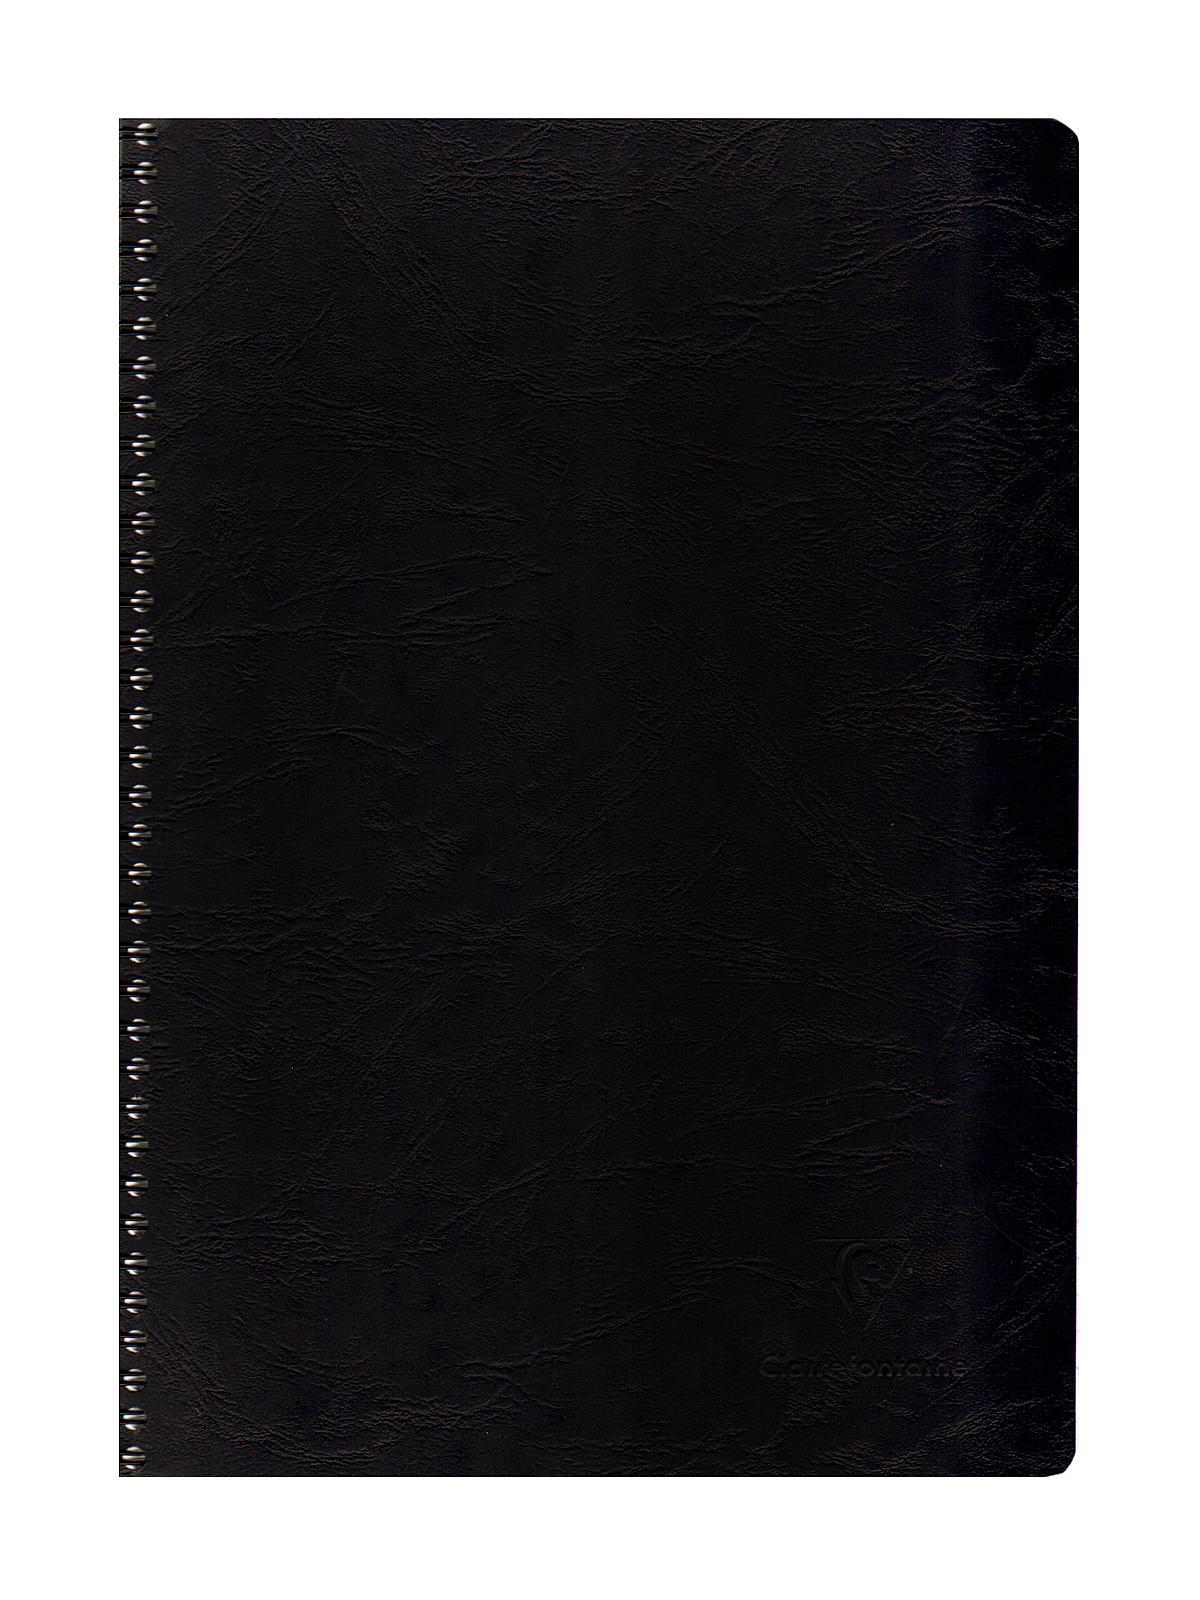 Classic Wirebound Notebooks 8 1 4 In. X 11 3 4 In. Ruled With Margin, Black Cover 50 Sheets